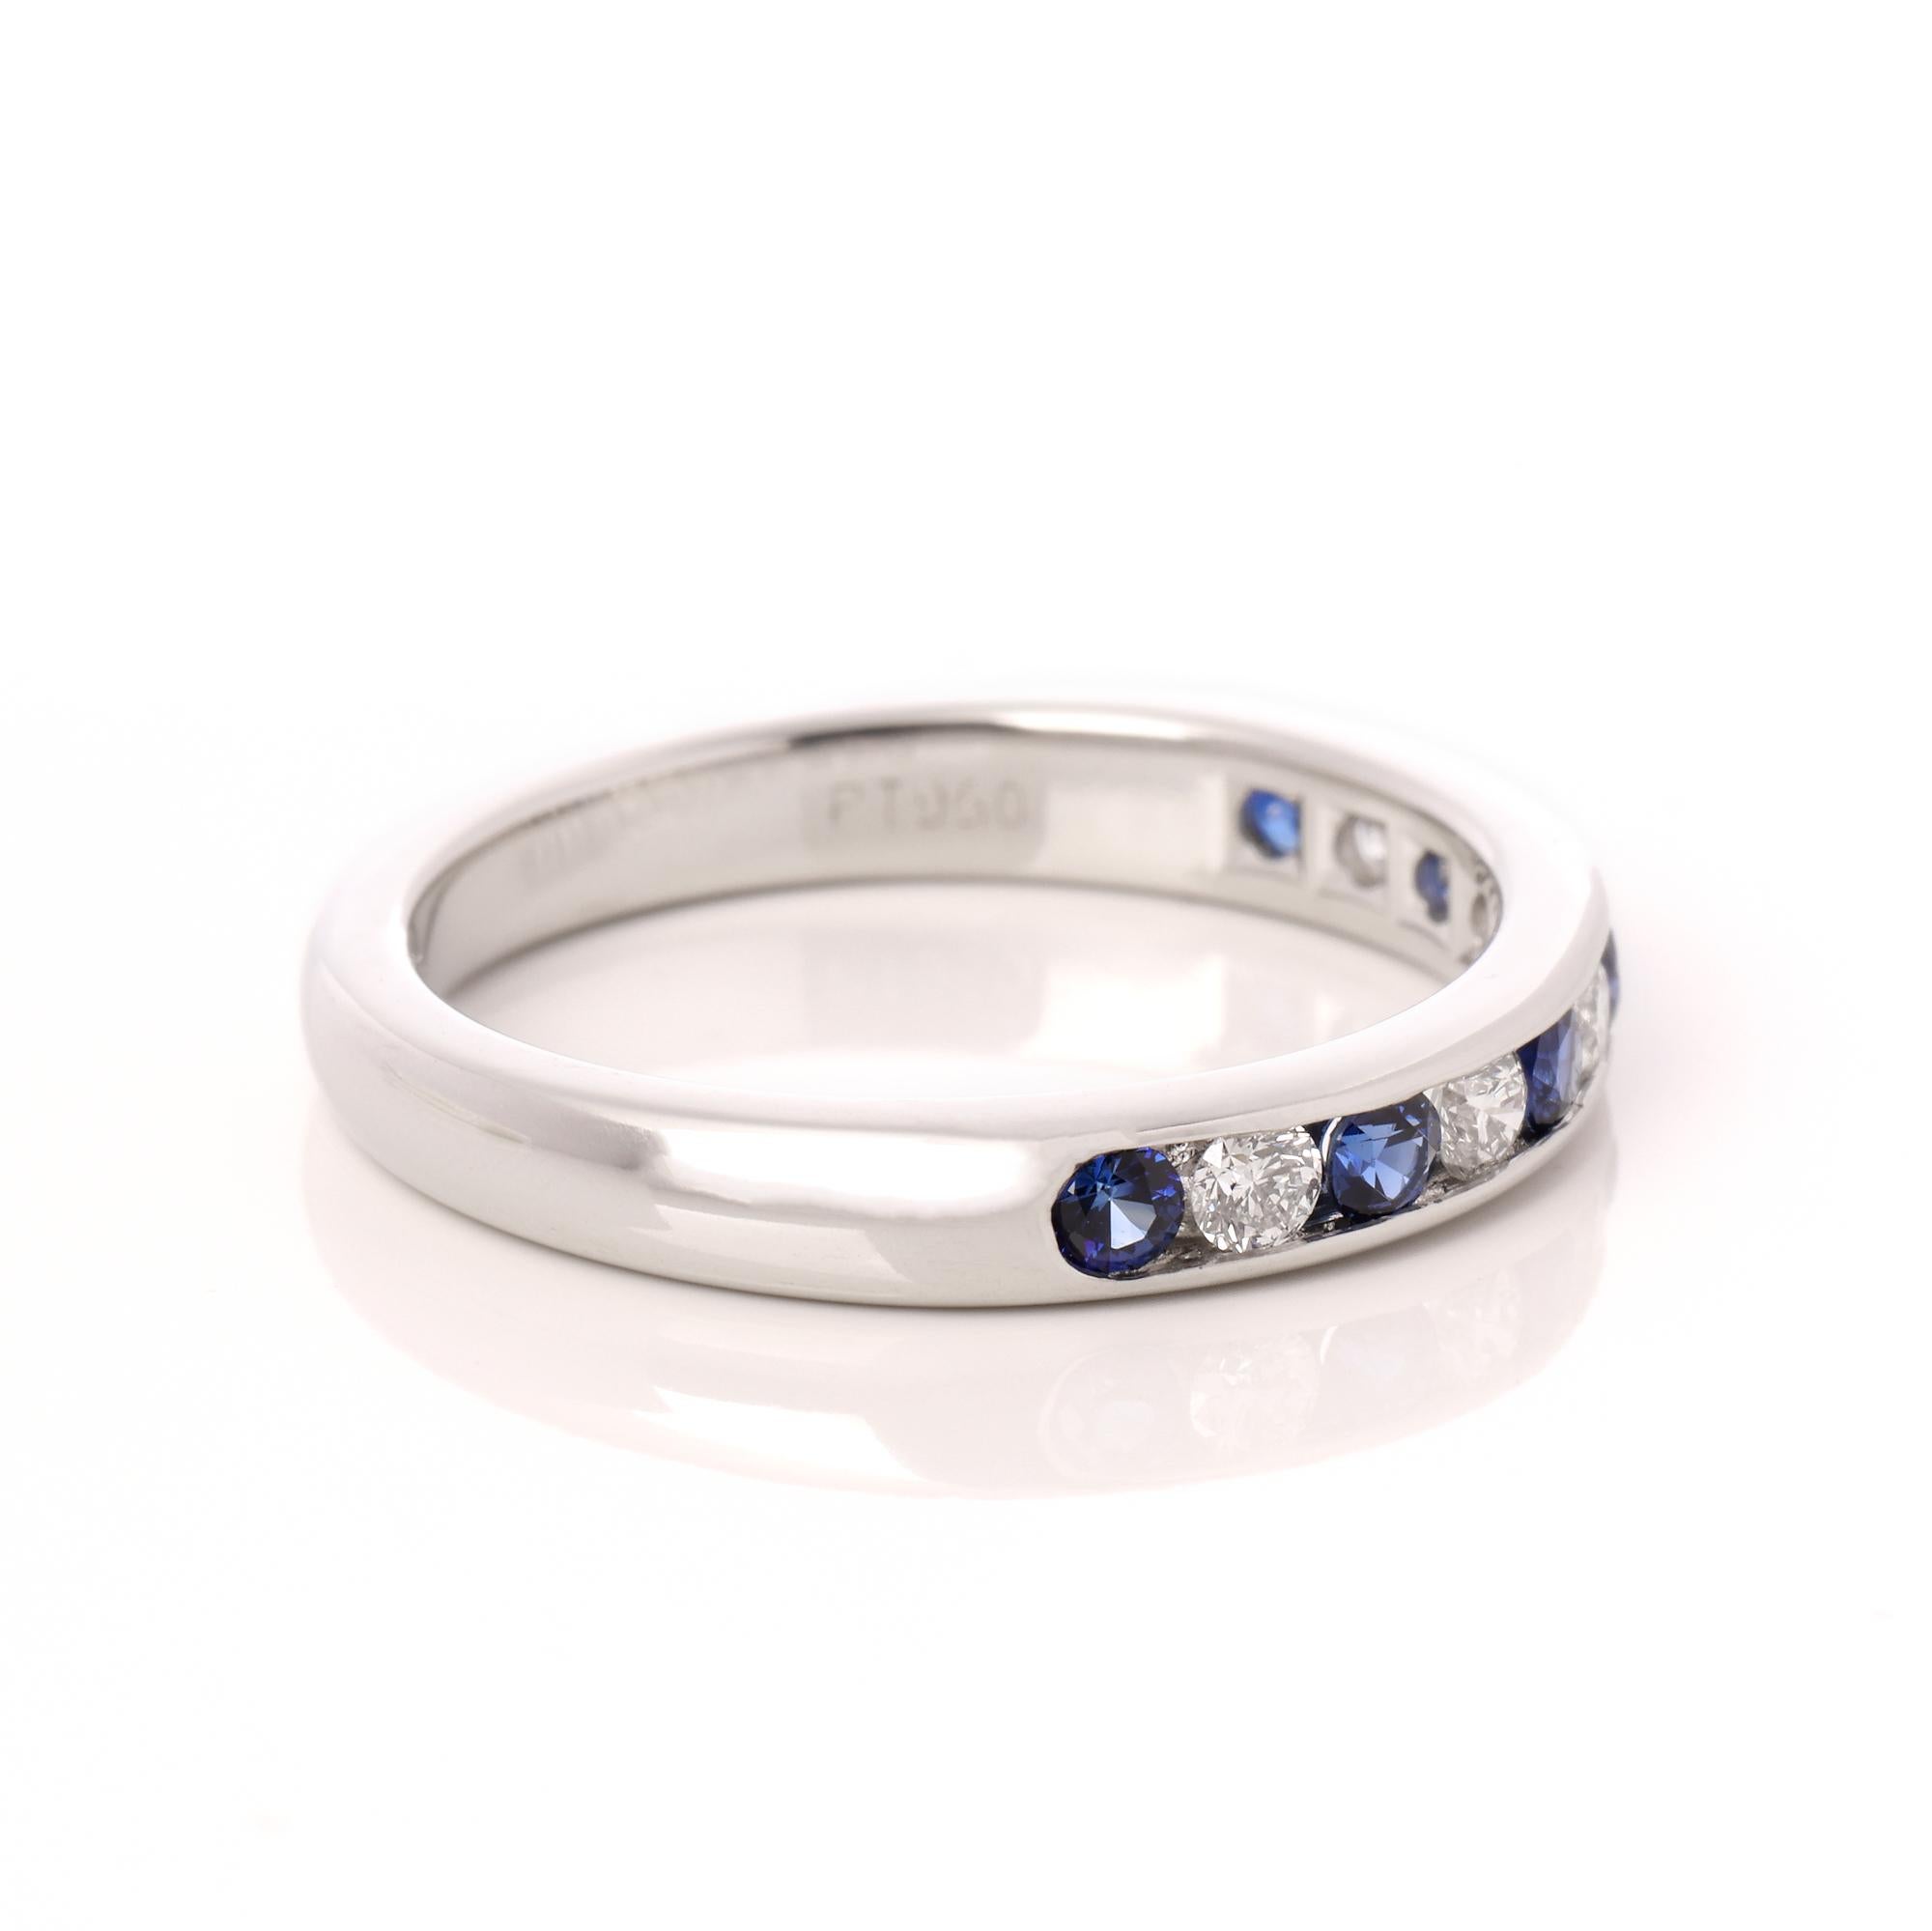 Contemporary Tiffany & Co. Diamond and Sapphire Wedding Band Ring